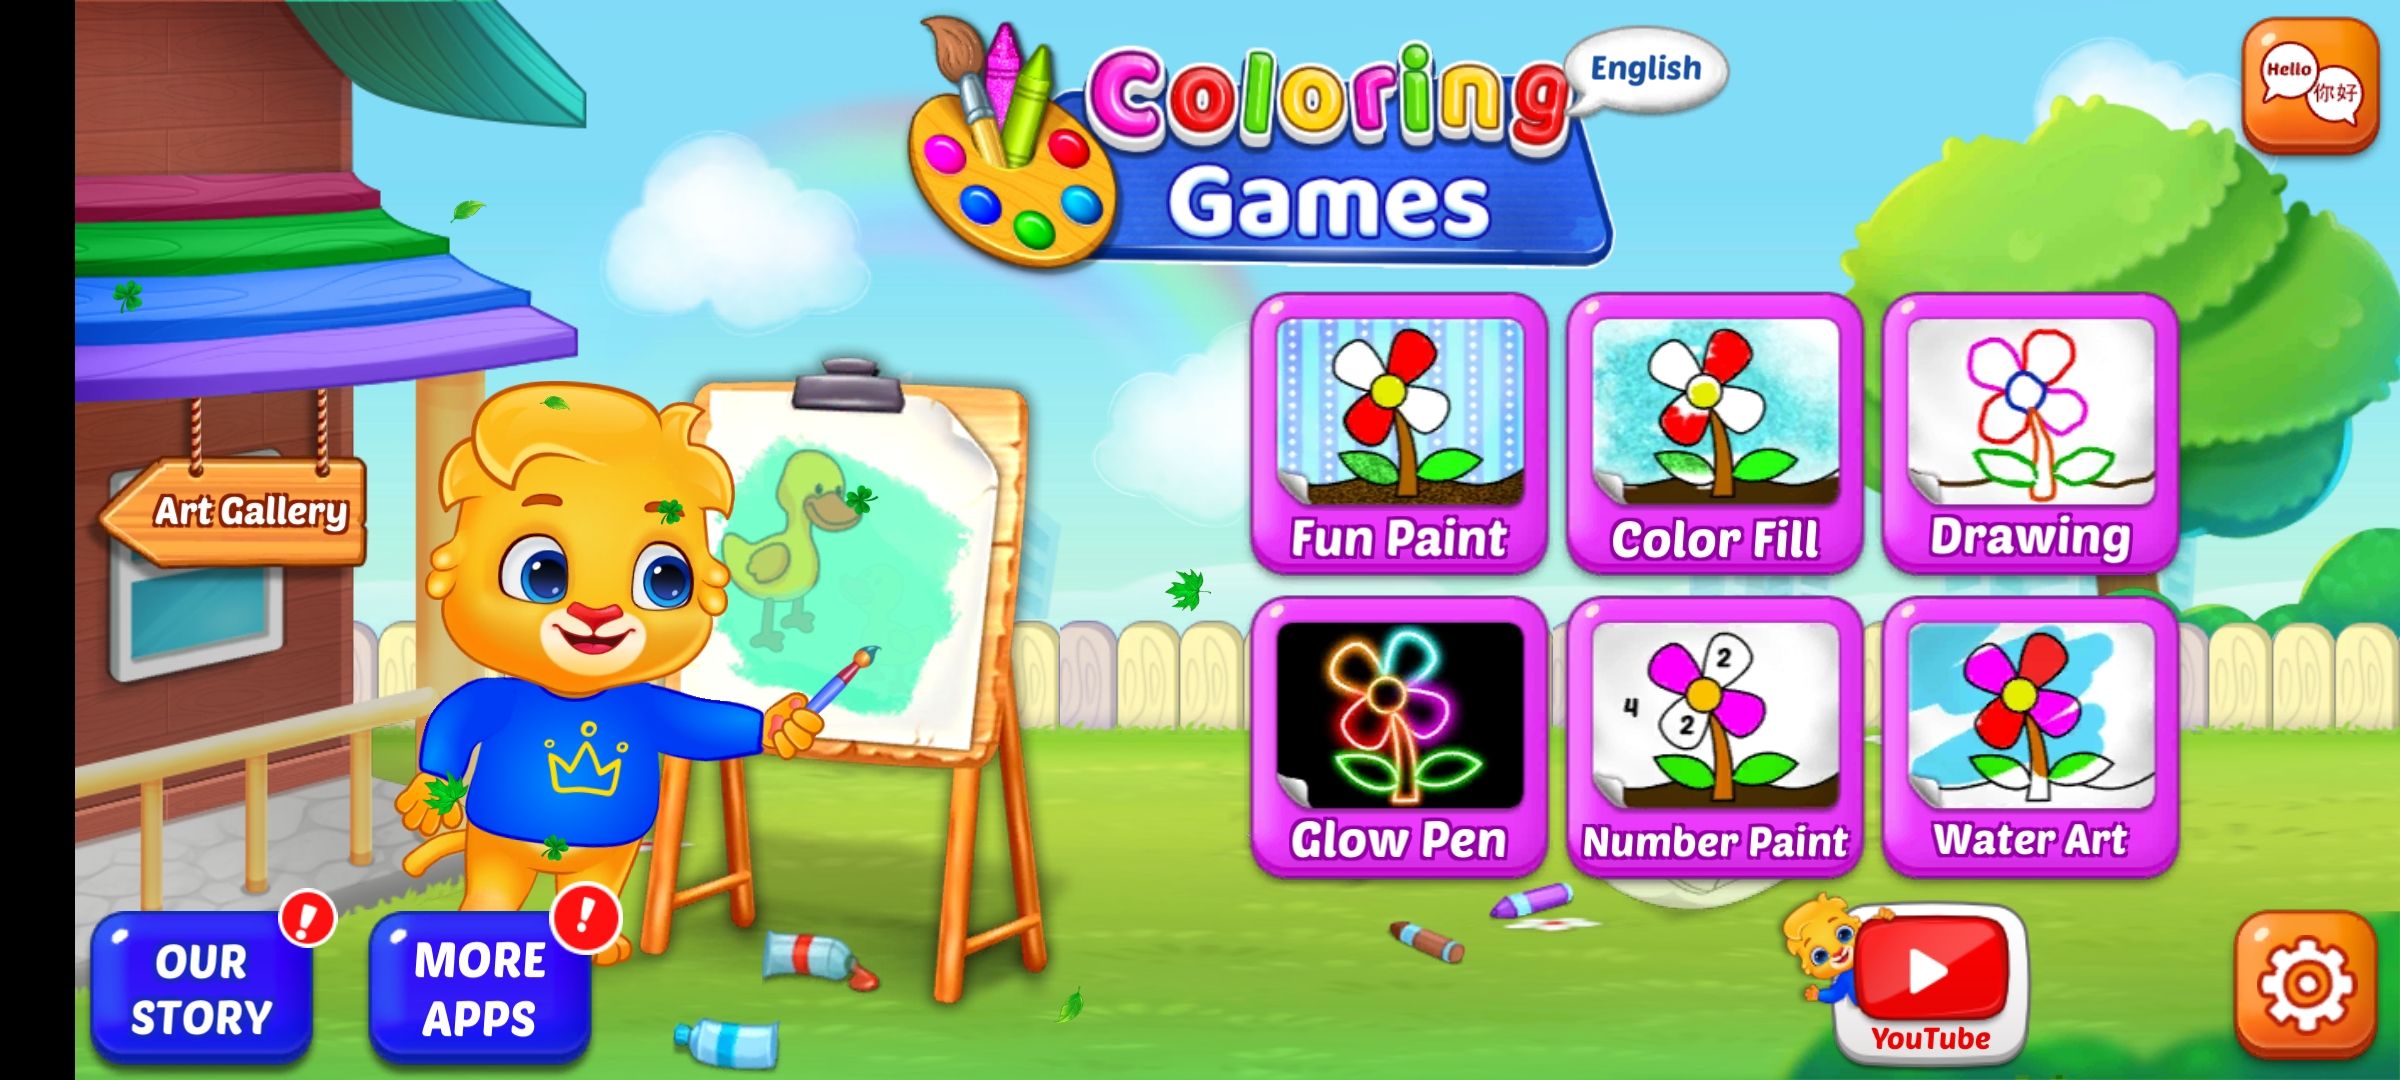 coloring games color and paint app home screen with lucas and friends